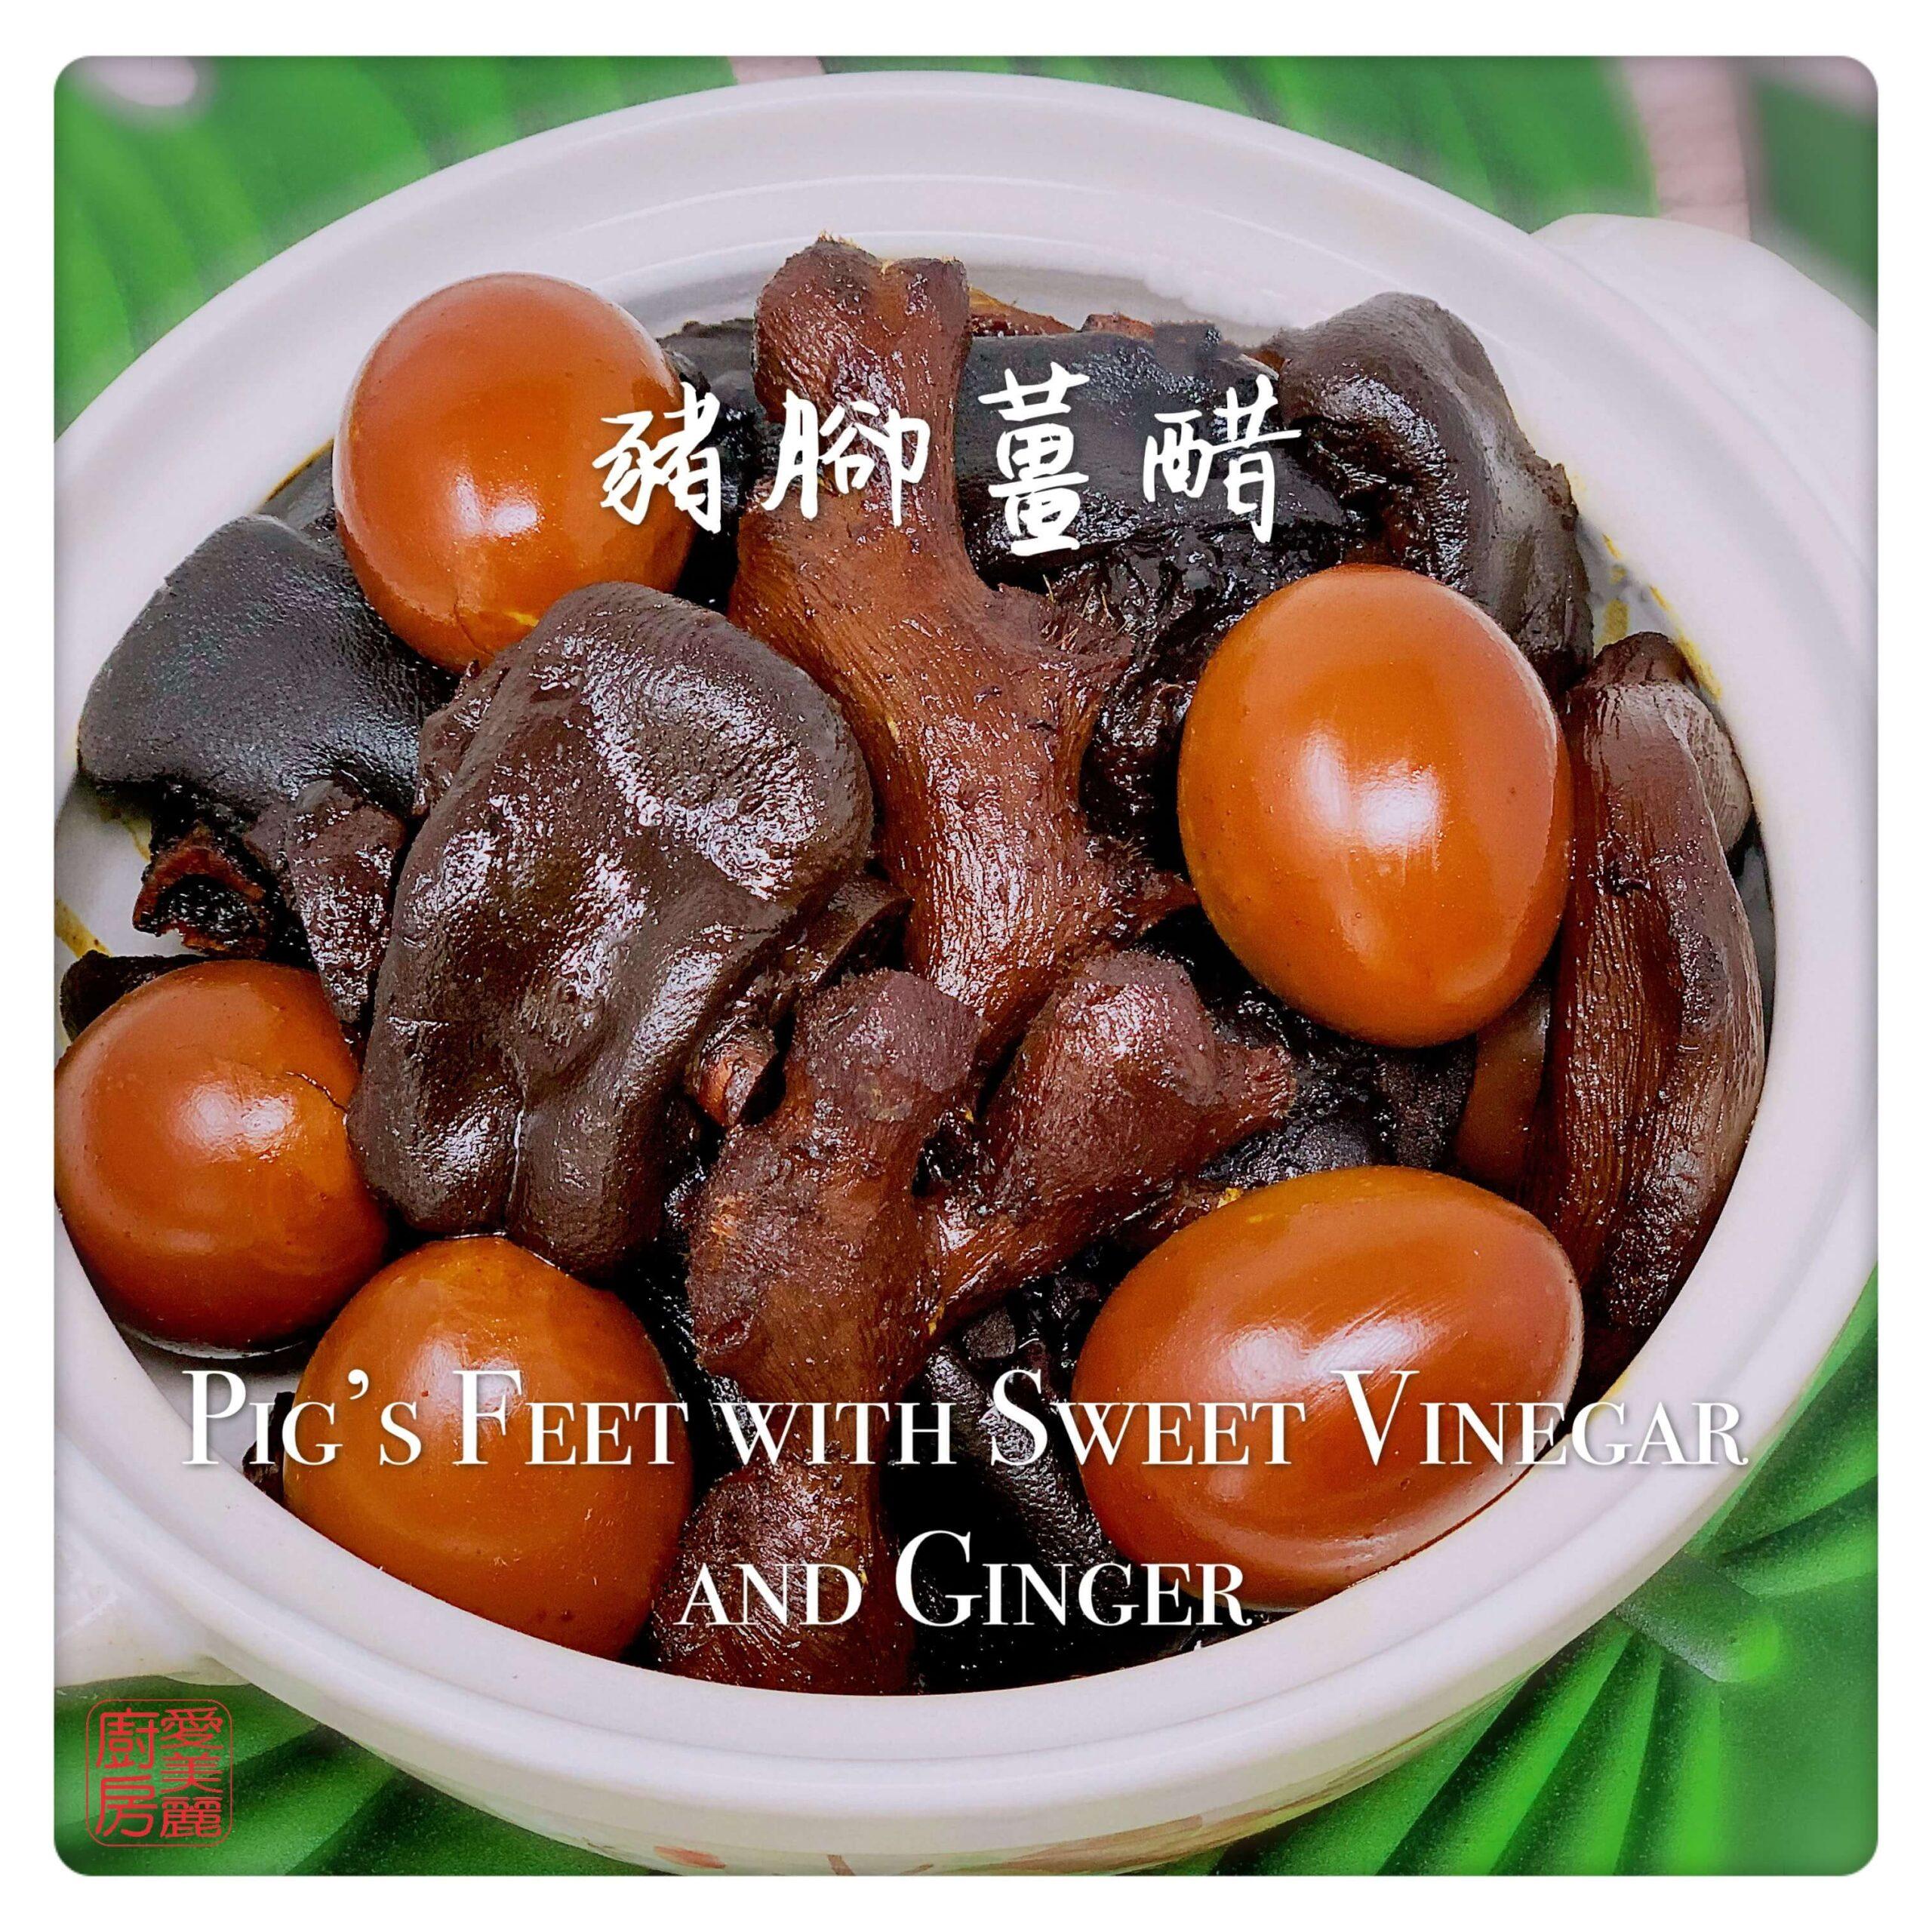 Pig’s Feet With Sweet Vinegar and Ginger 豬腳薑醋